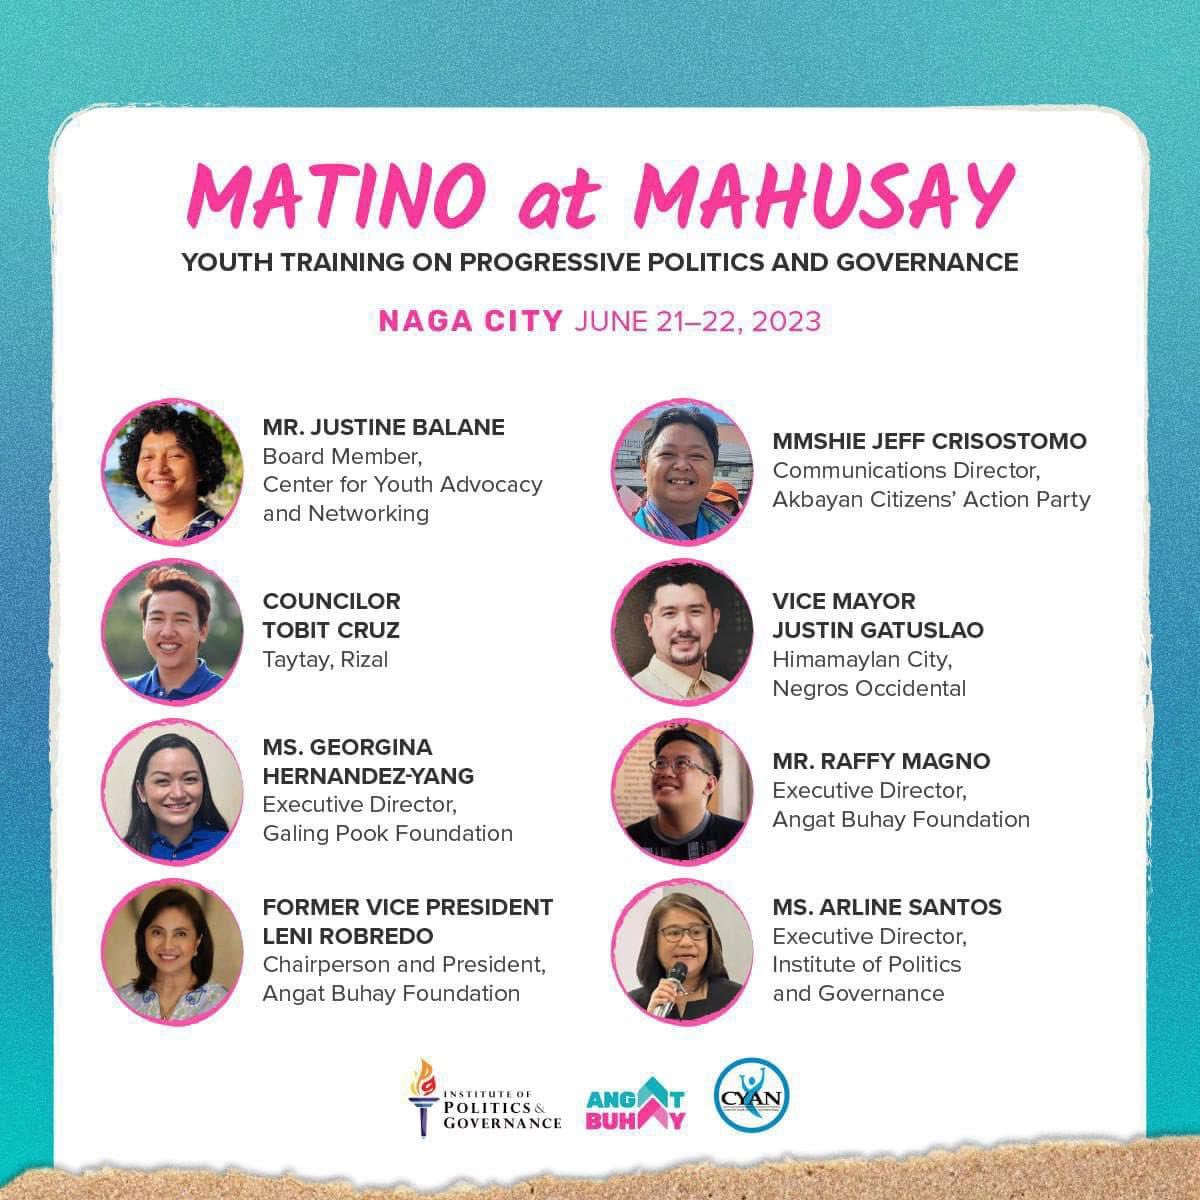 MATINO AT MAHUSAY

@angatbuhay_ph , in partnership with the Institute of Politics and Governance and the Center for Youth Advocacy and Networking (CYAN), will conduct a Youth Training on Progressive Politics and Governance in Naga City this June 21-22, 2023!